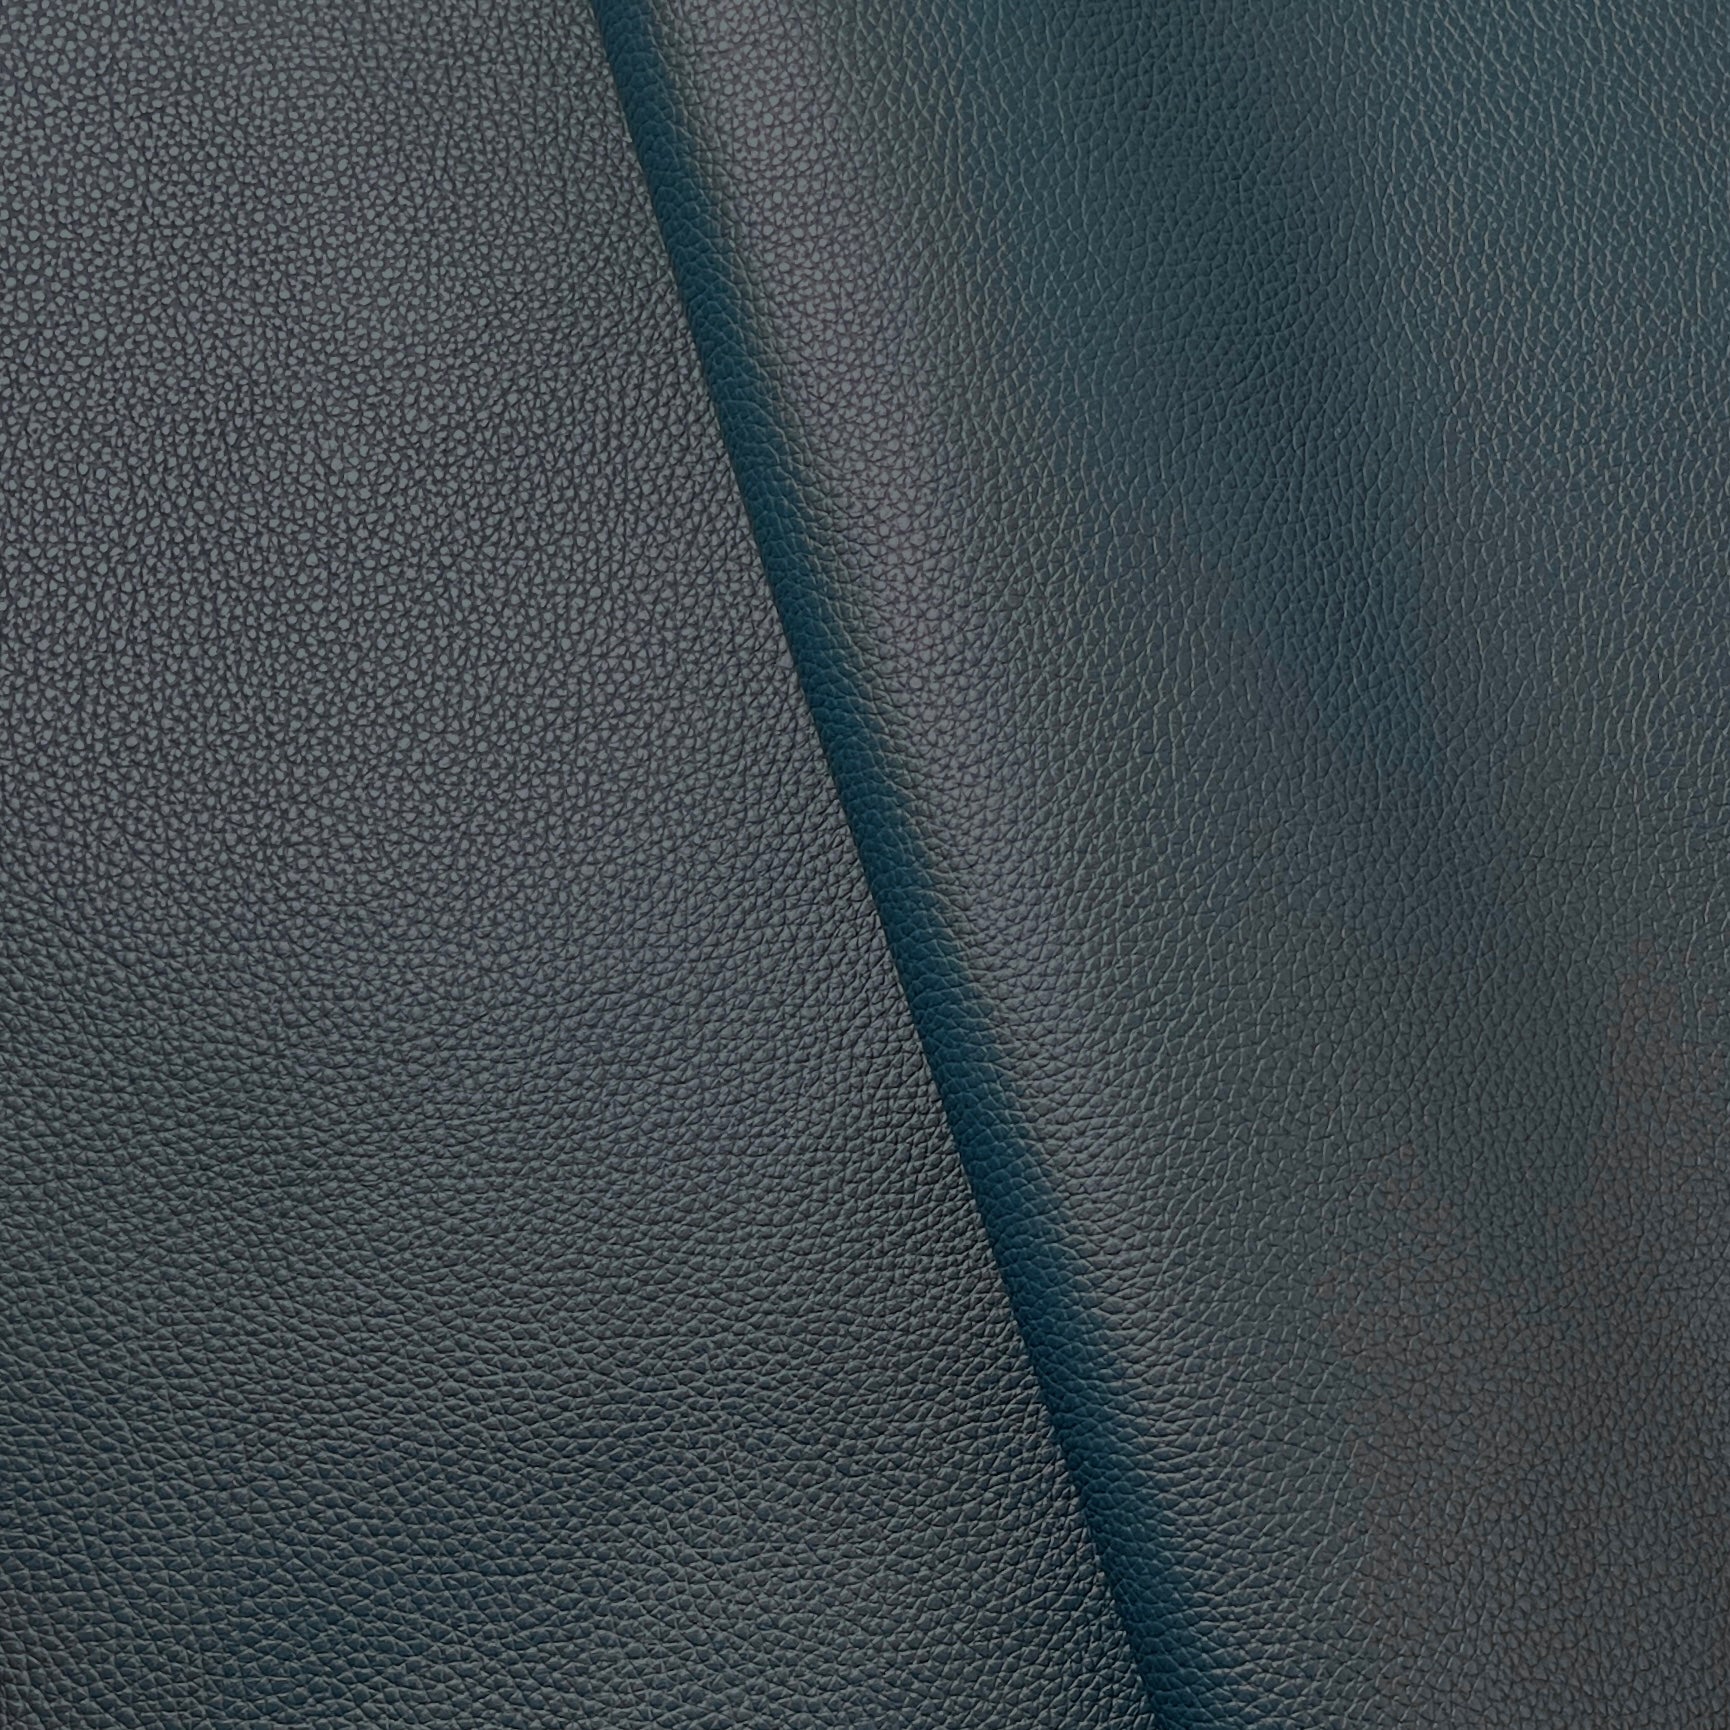 Full-grain Milled Cow Combination-Tanned Leather - Peacock Blue - Crafune